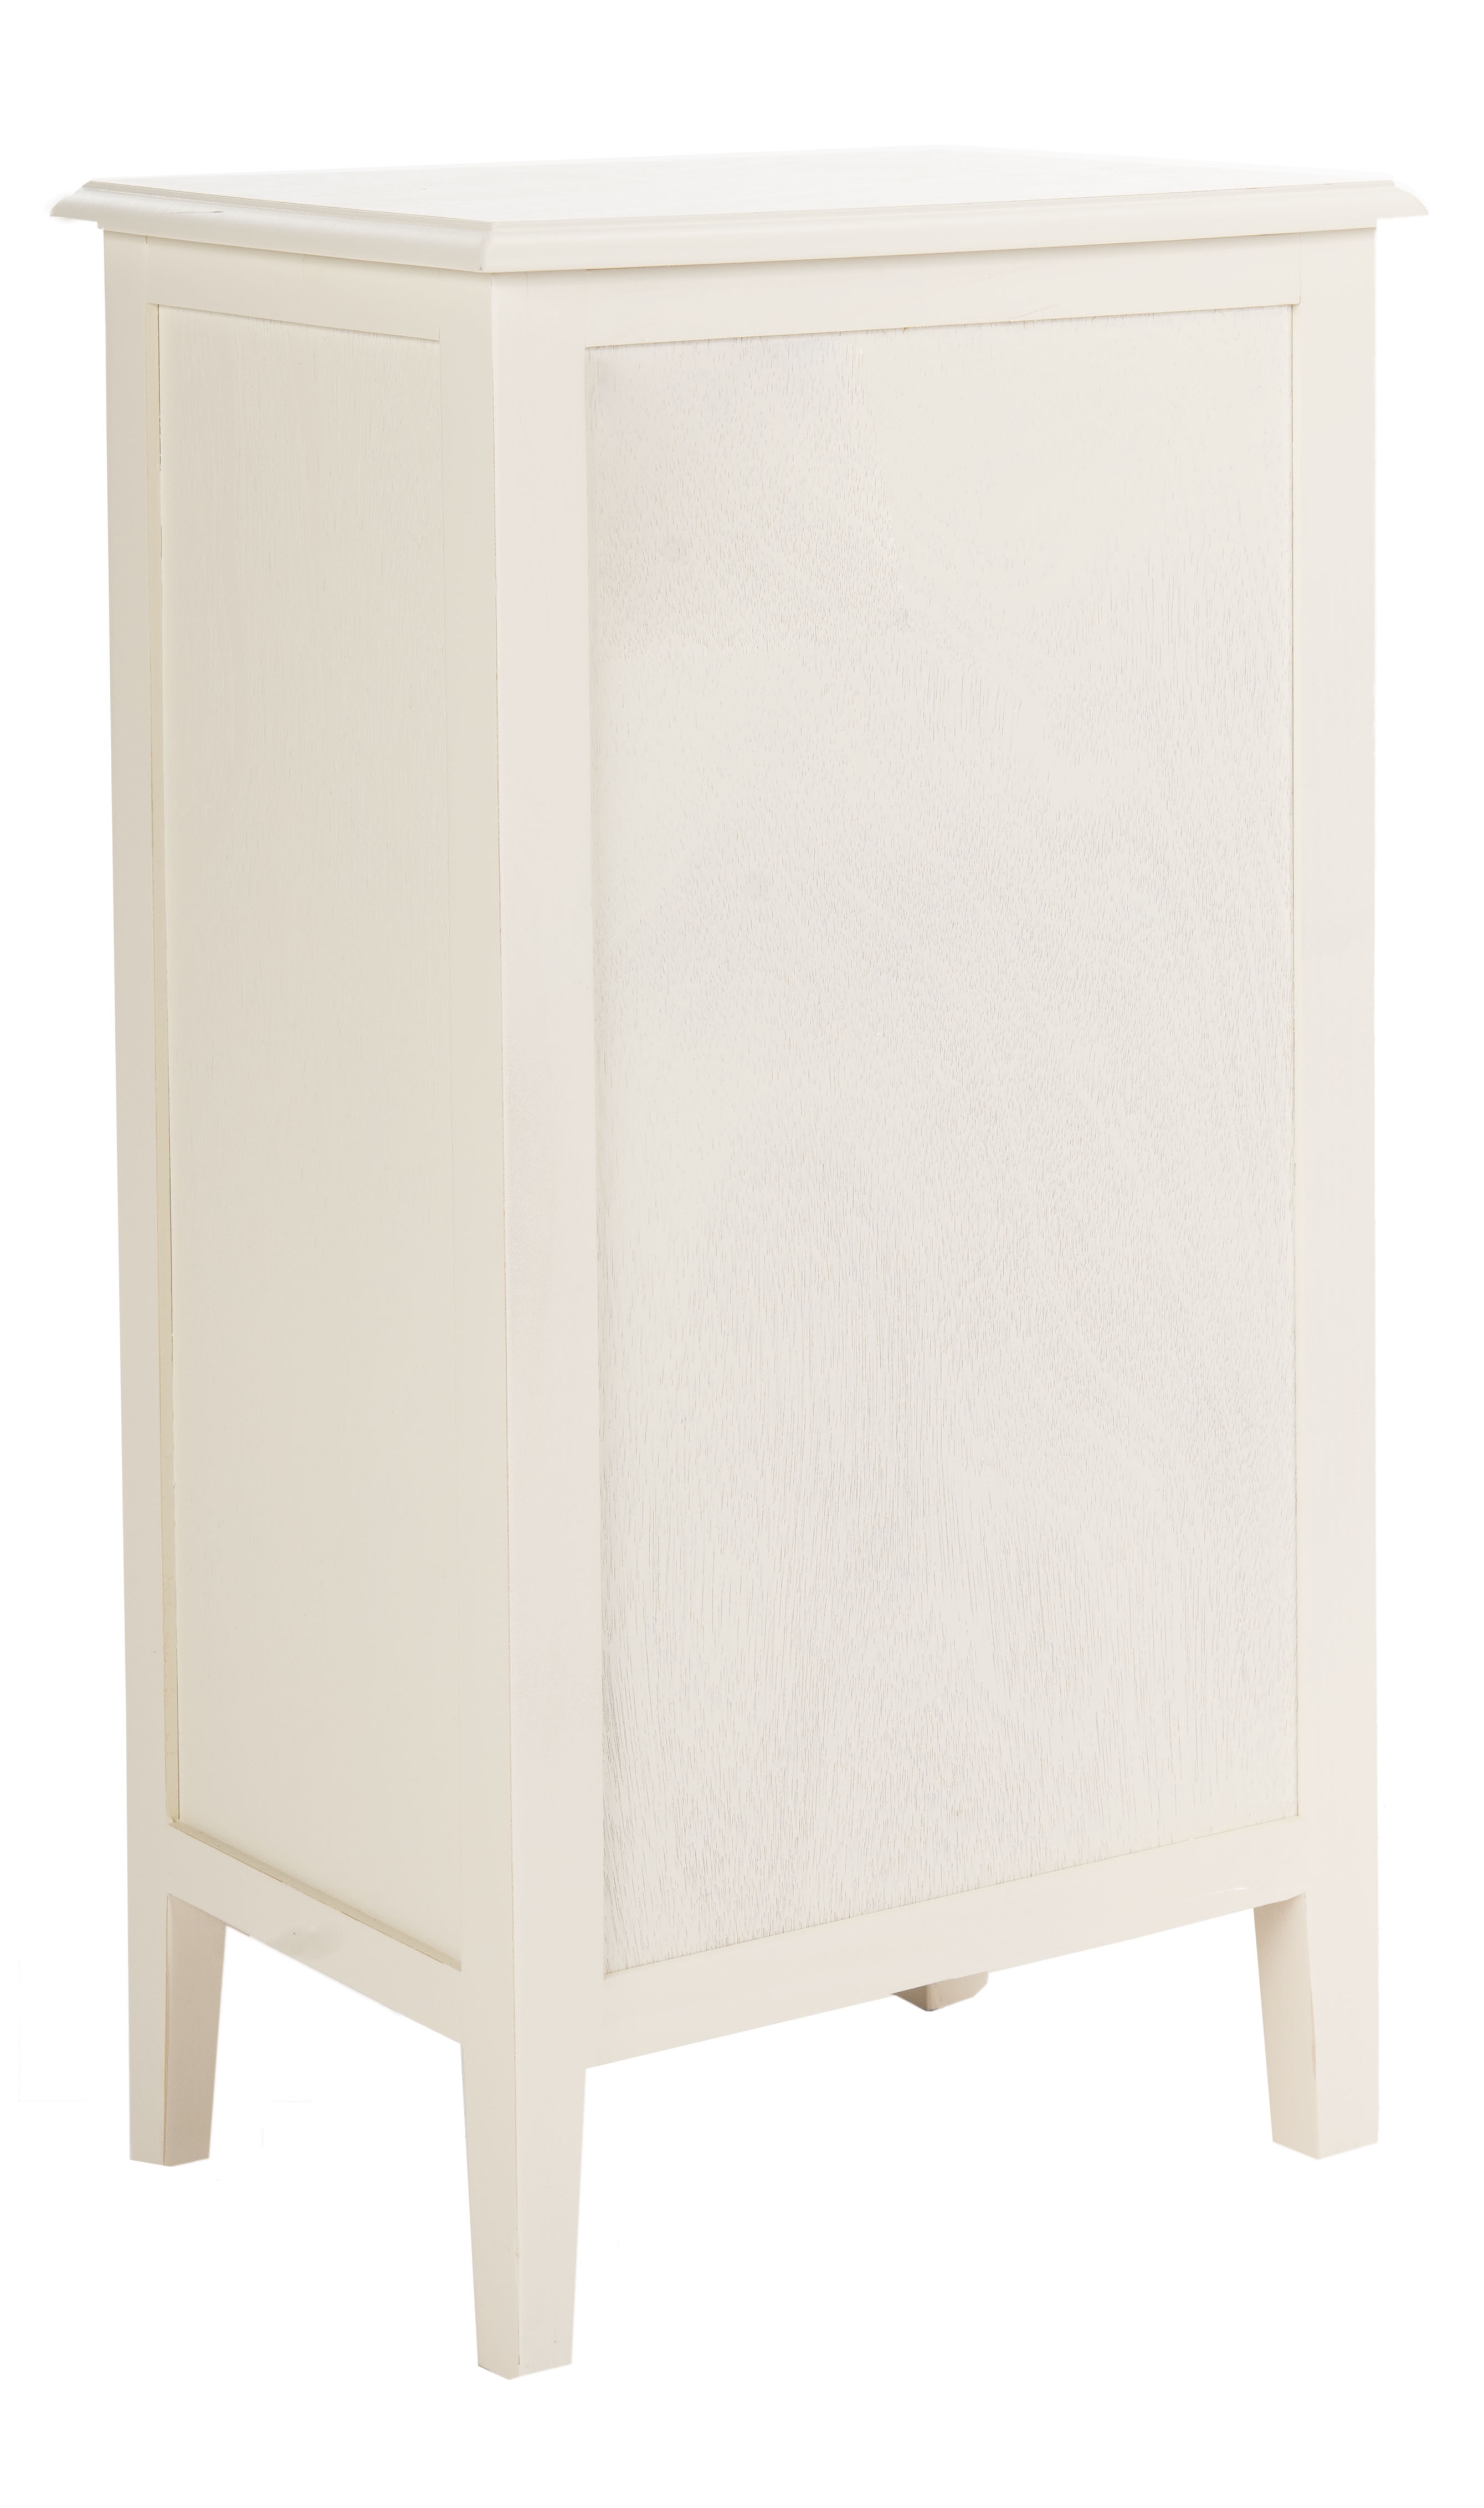 Everly Drawer Side Table - Distressed White - Safavieh - Image 1